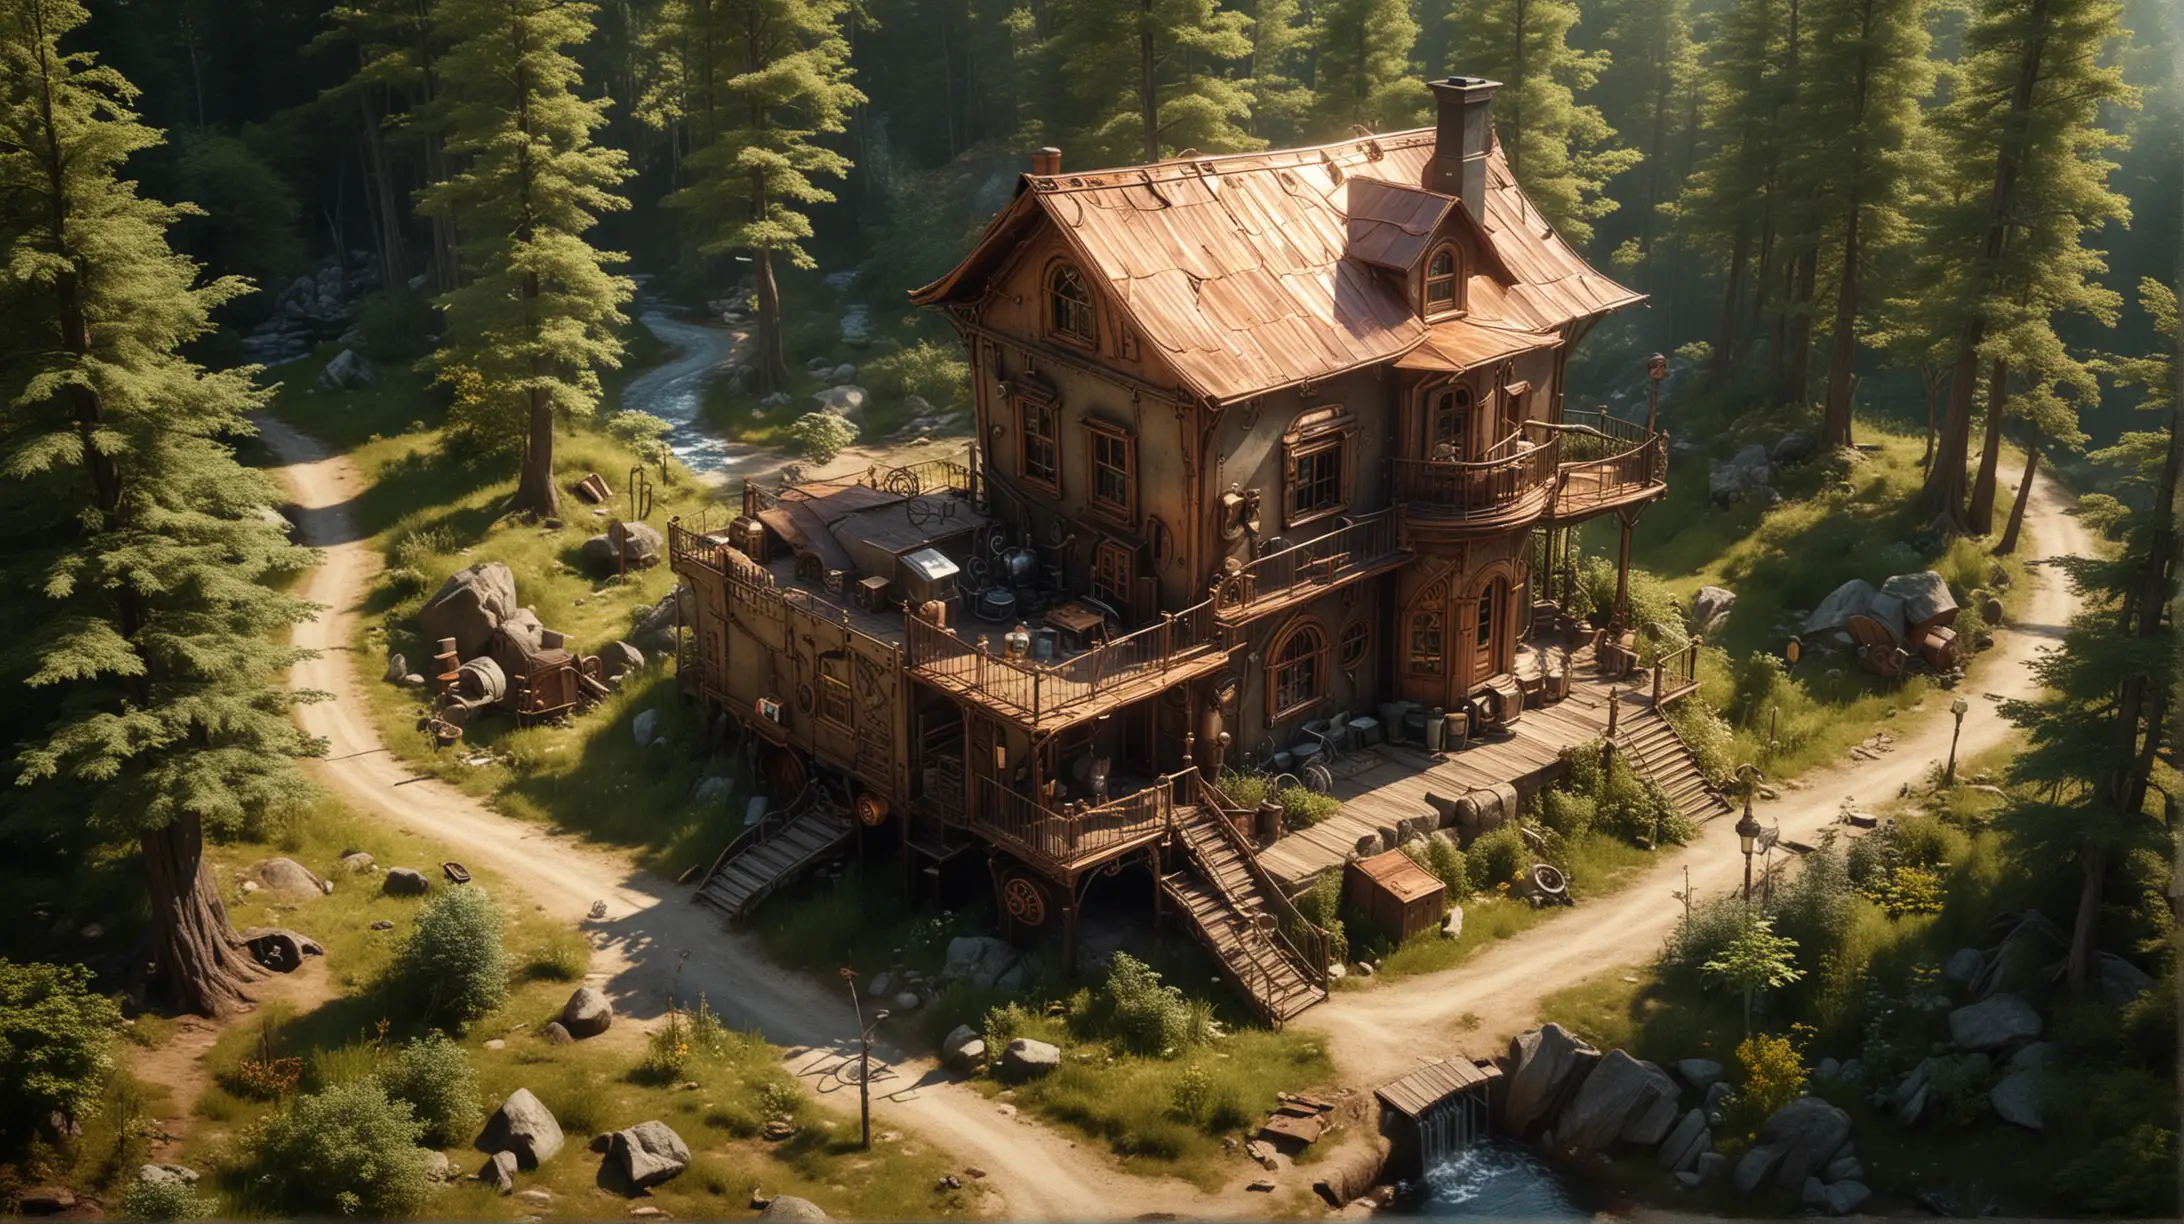 a small steampunk house in a forest near a winding stream and narrow dirt road, copper, wood, sunny, bird's eye view